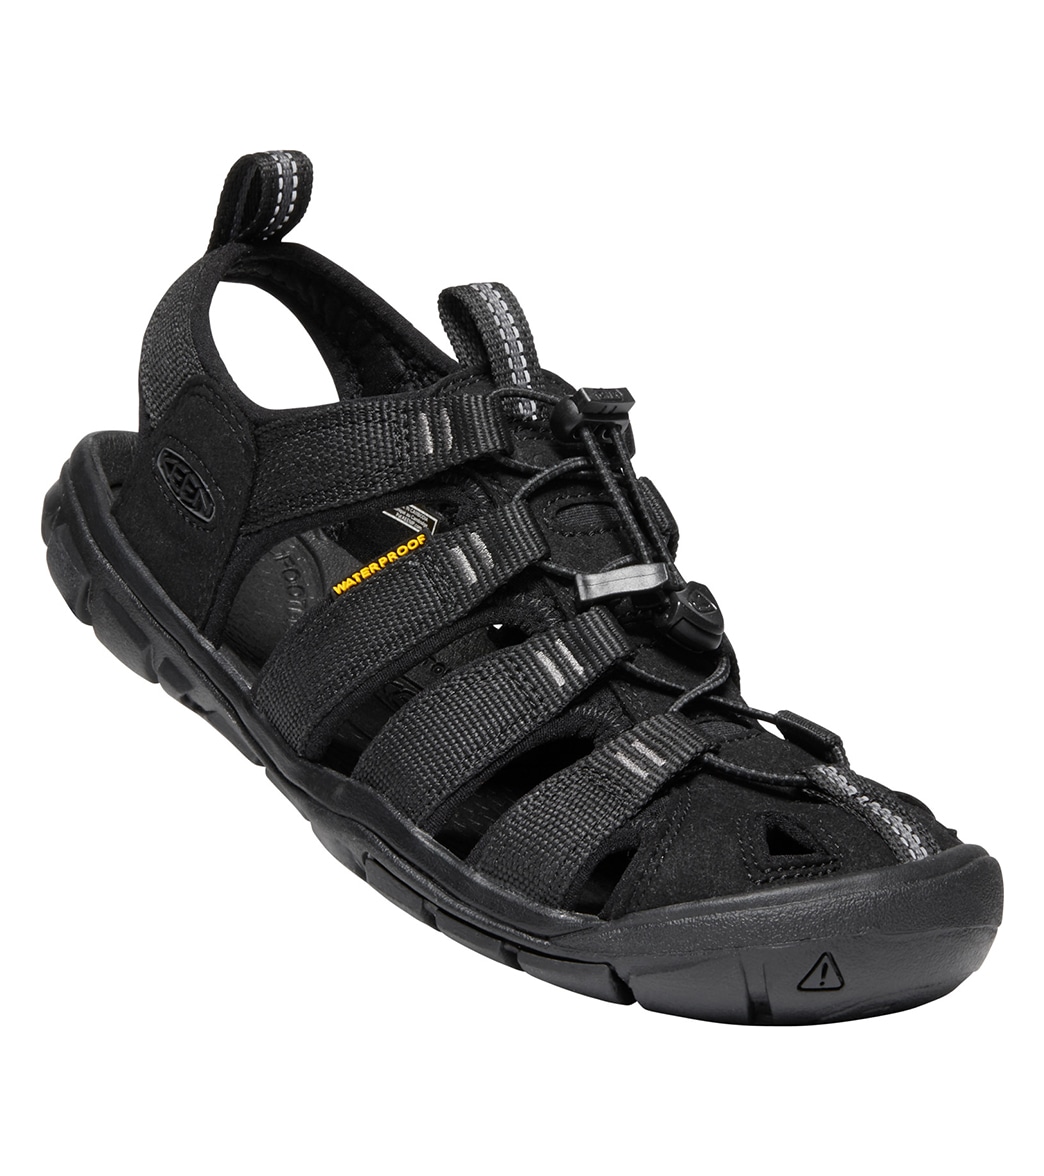 Keen Women's Clearwater Cnx Water Shoes - Black/Black 11 - Swimoutlet.com